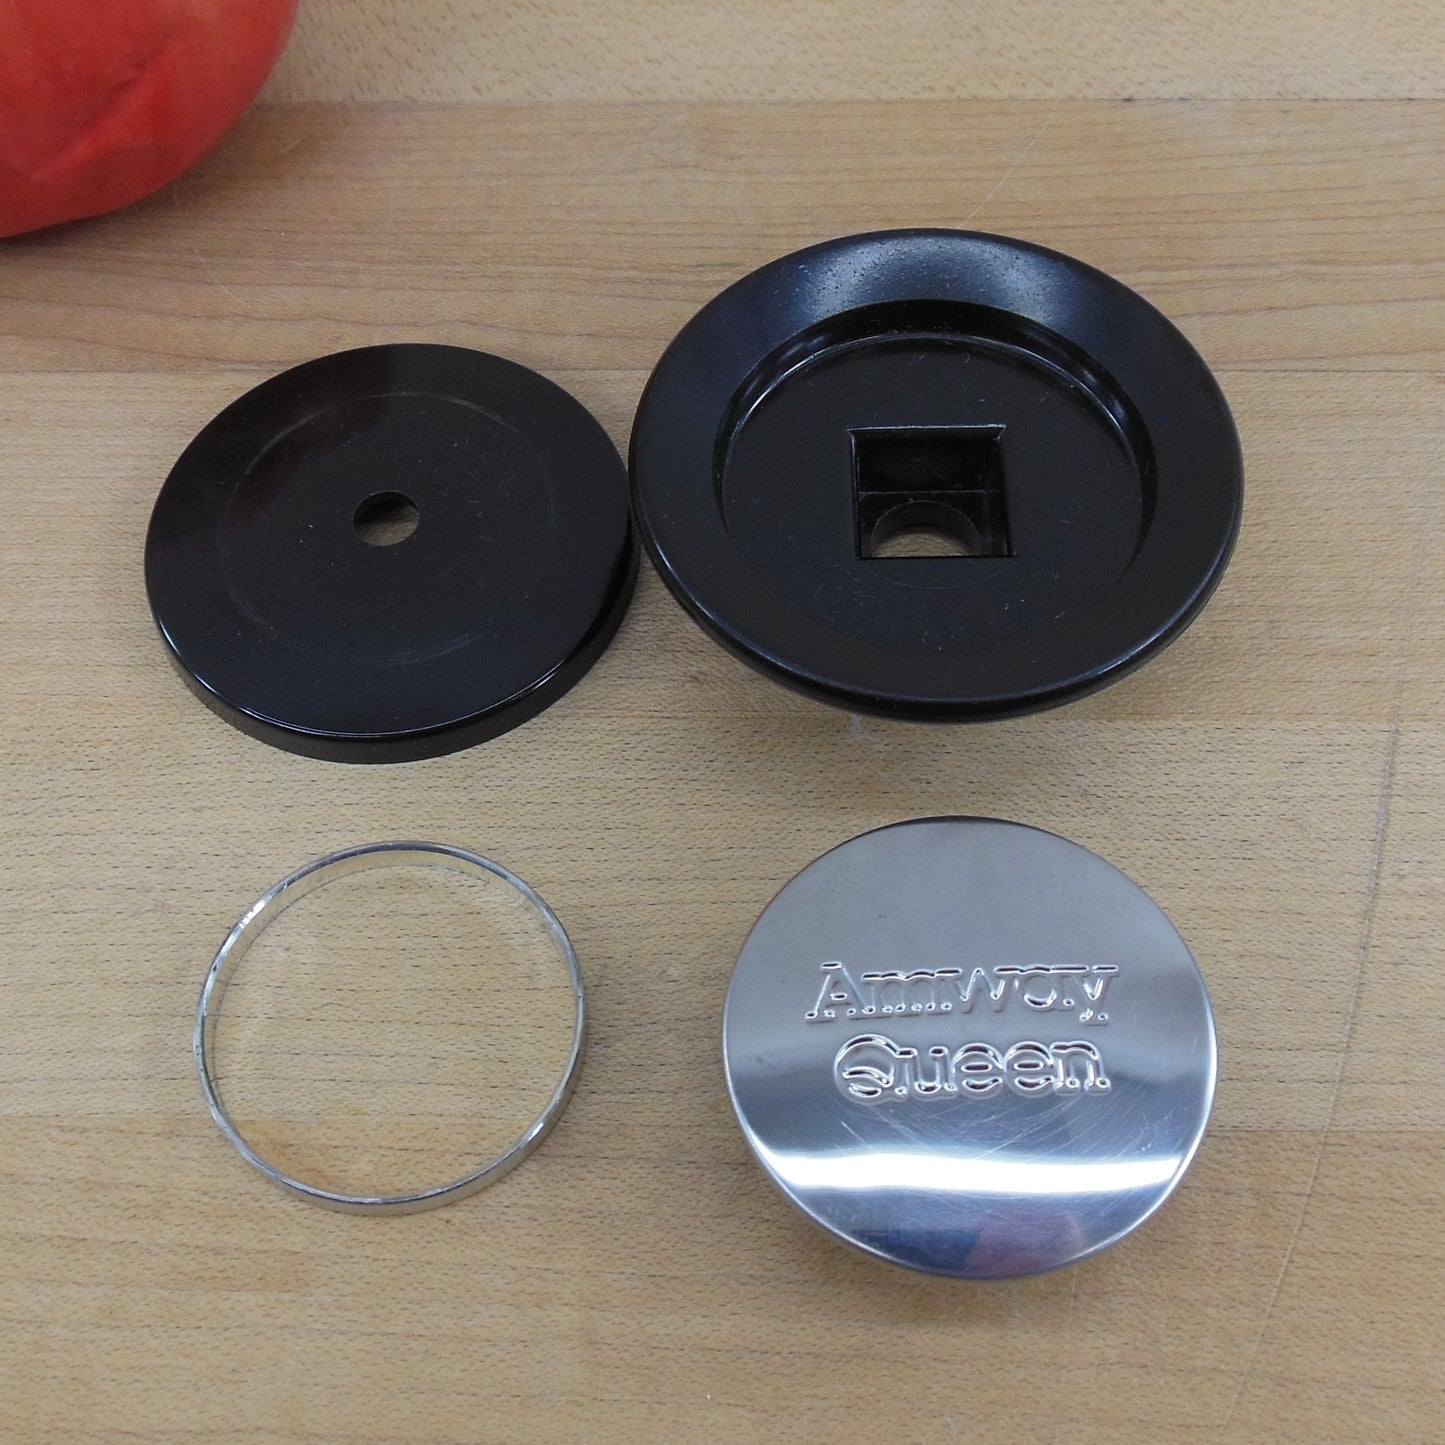 Amway Queen Cookware Used Replacement Part - 4 Piece Lid Knob